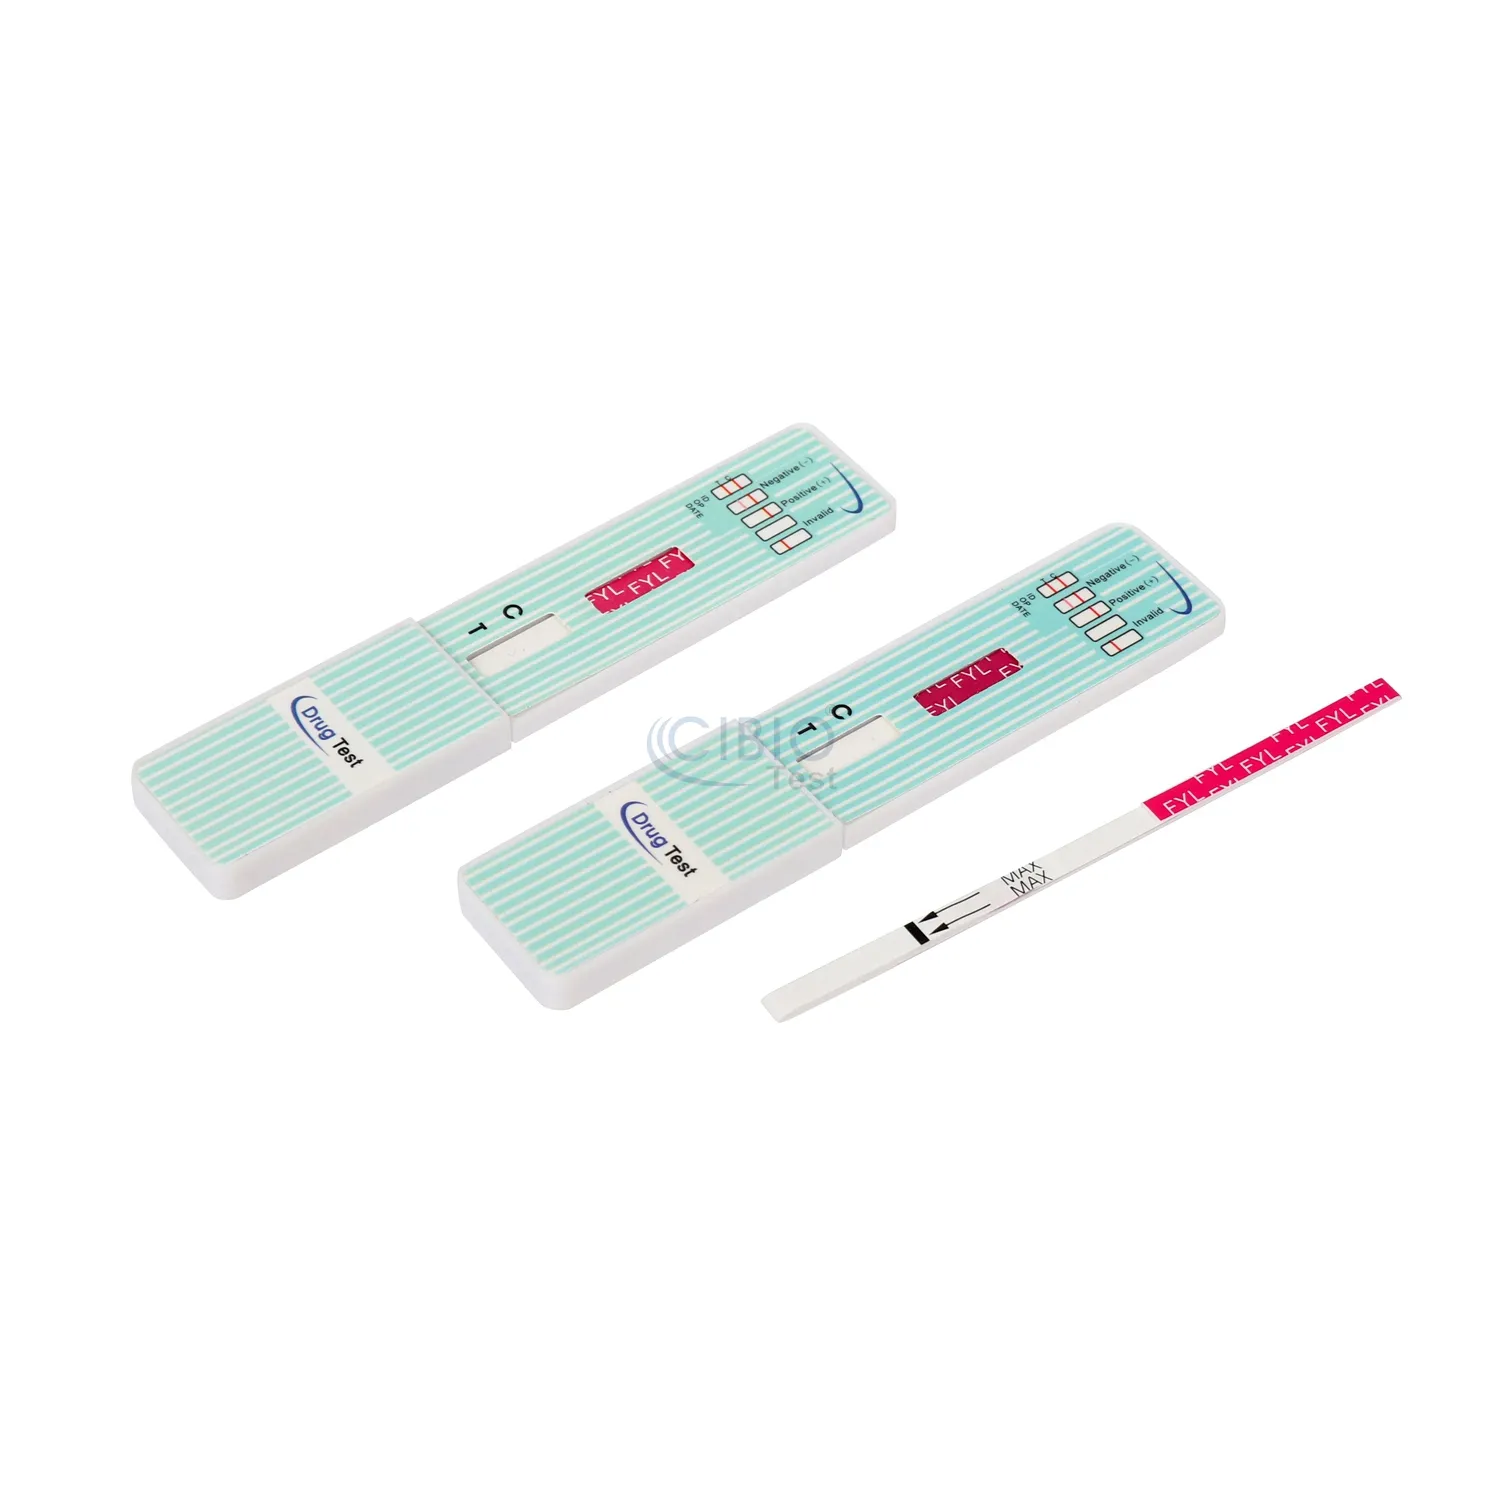 CLIA WAIVED approved FYL 20 or 200ng/mL urine drugs test strips